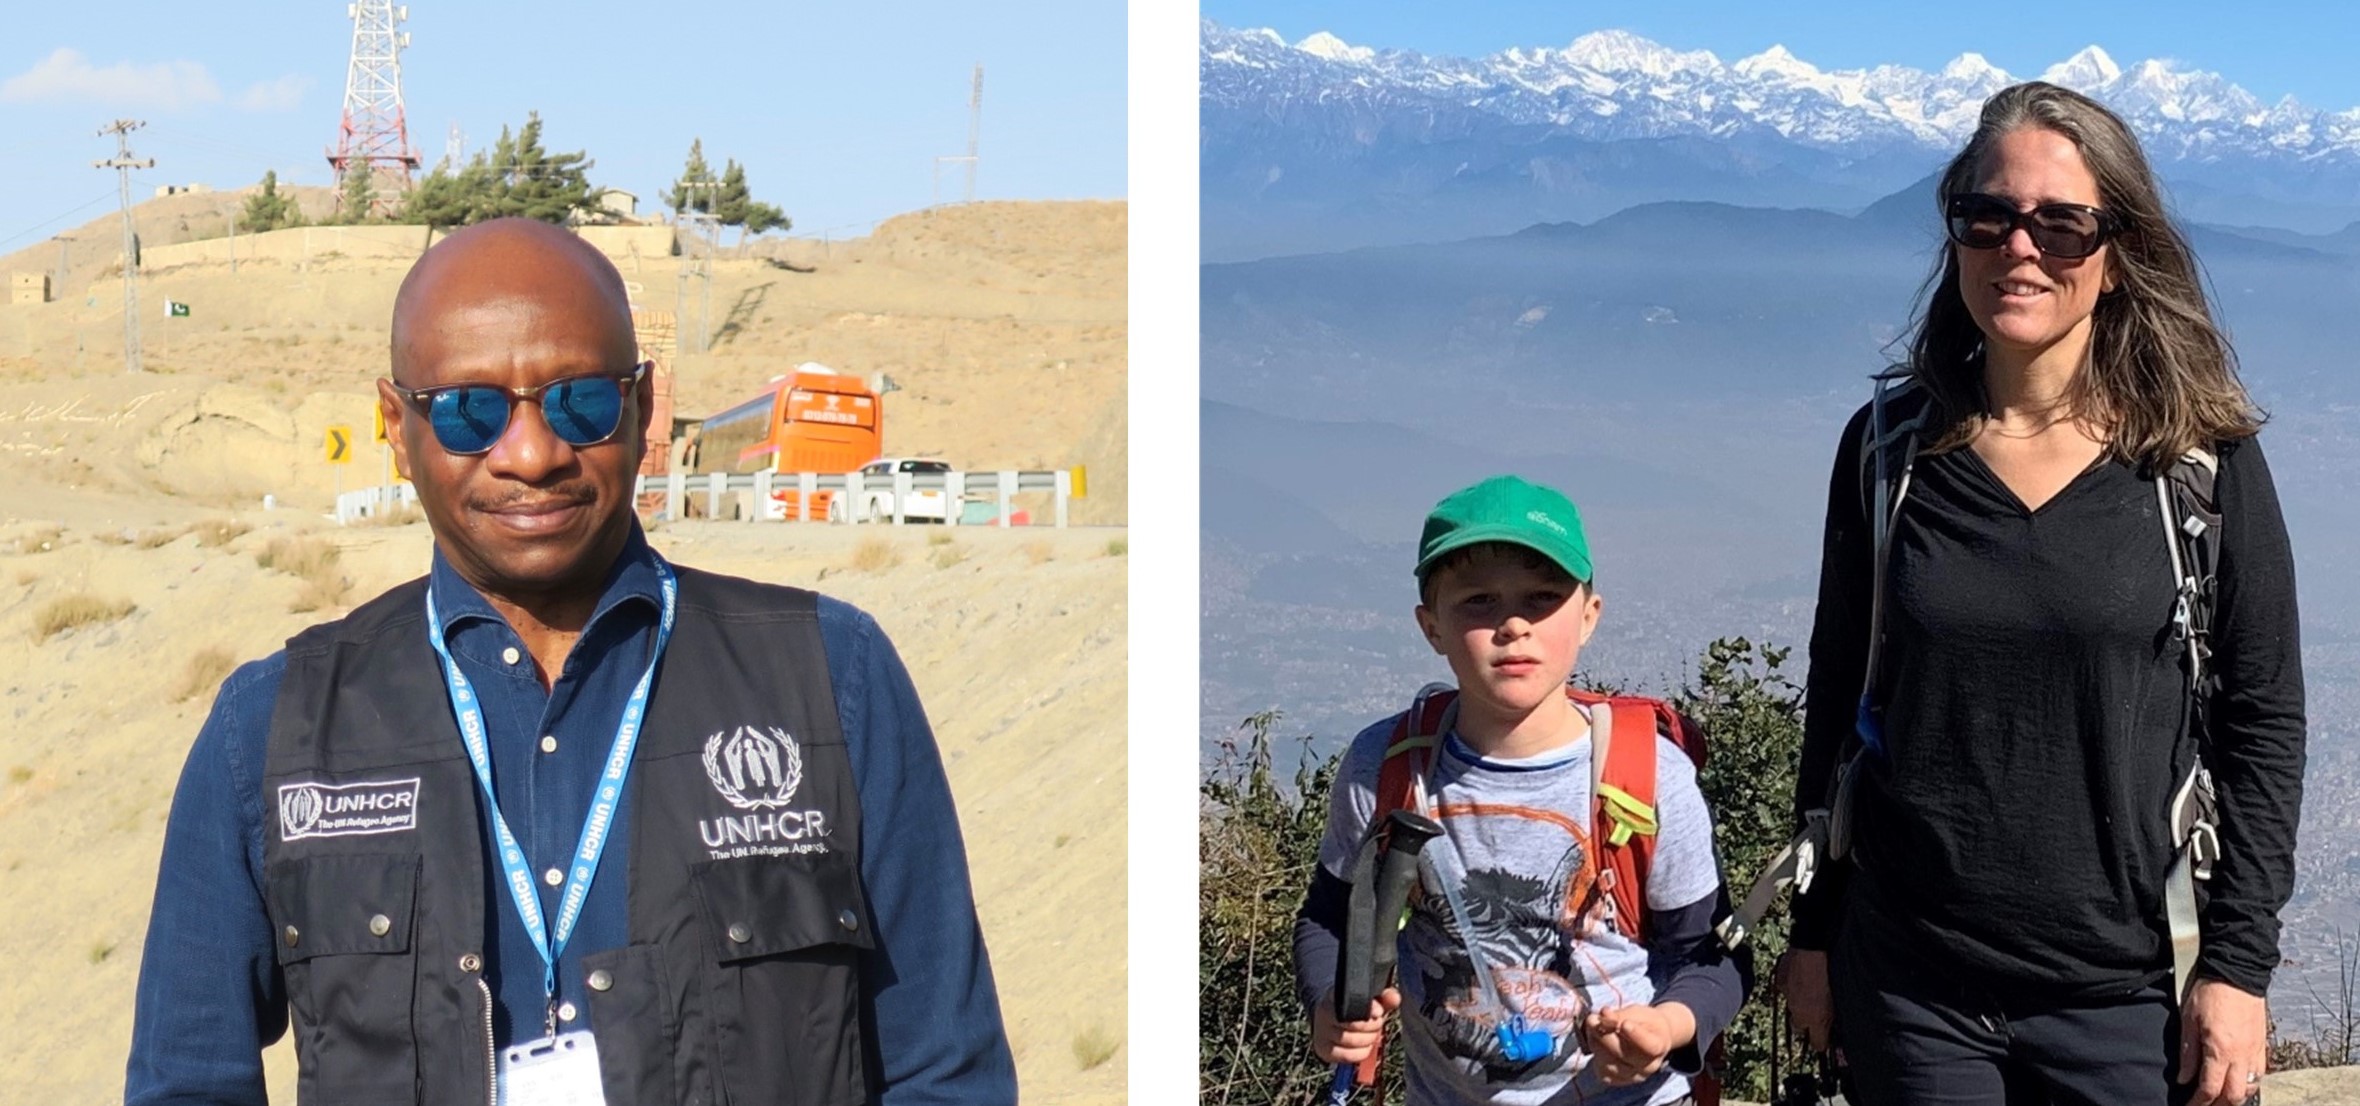 Khalid Mahgoub on a day mission to the border of Pakistan and Afghanistan (left) and Harriet Torlesse trekking with family above Kathmandu Valley in Nepal (right).